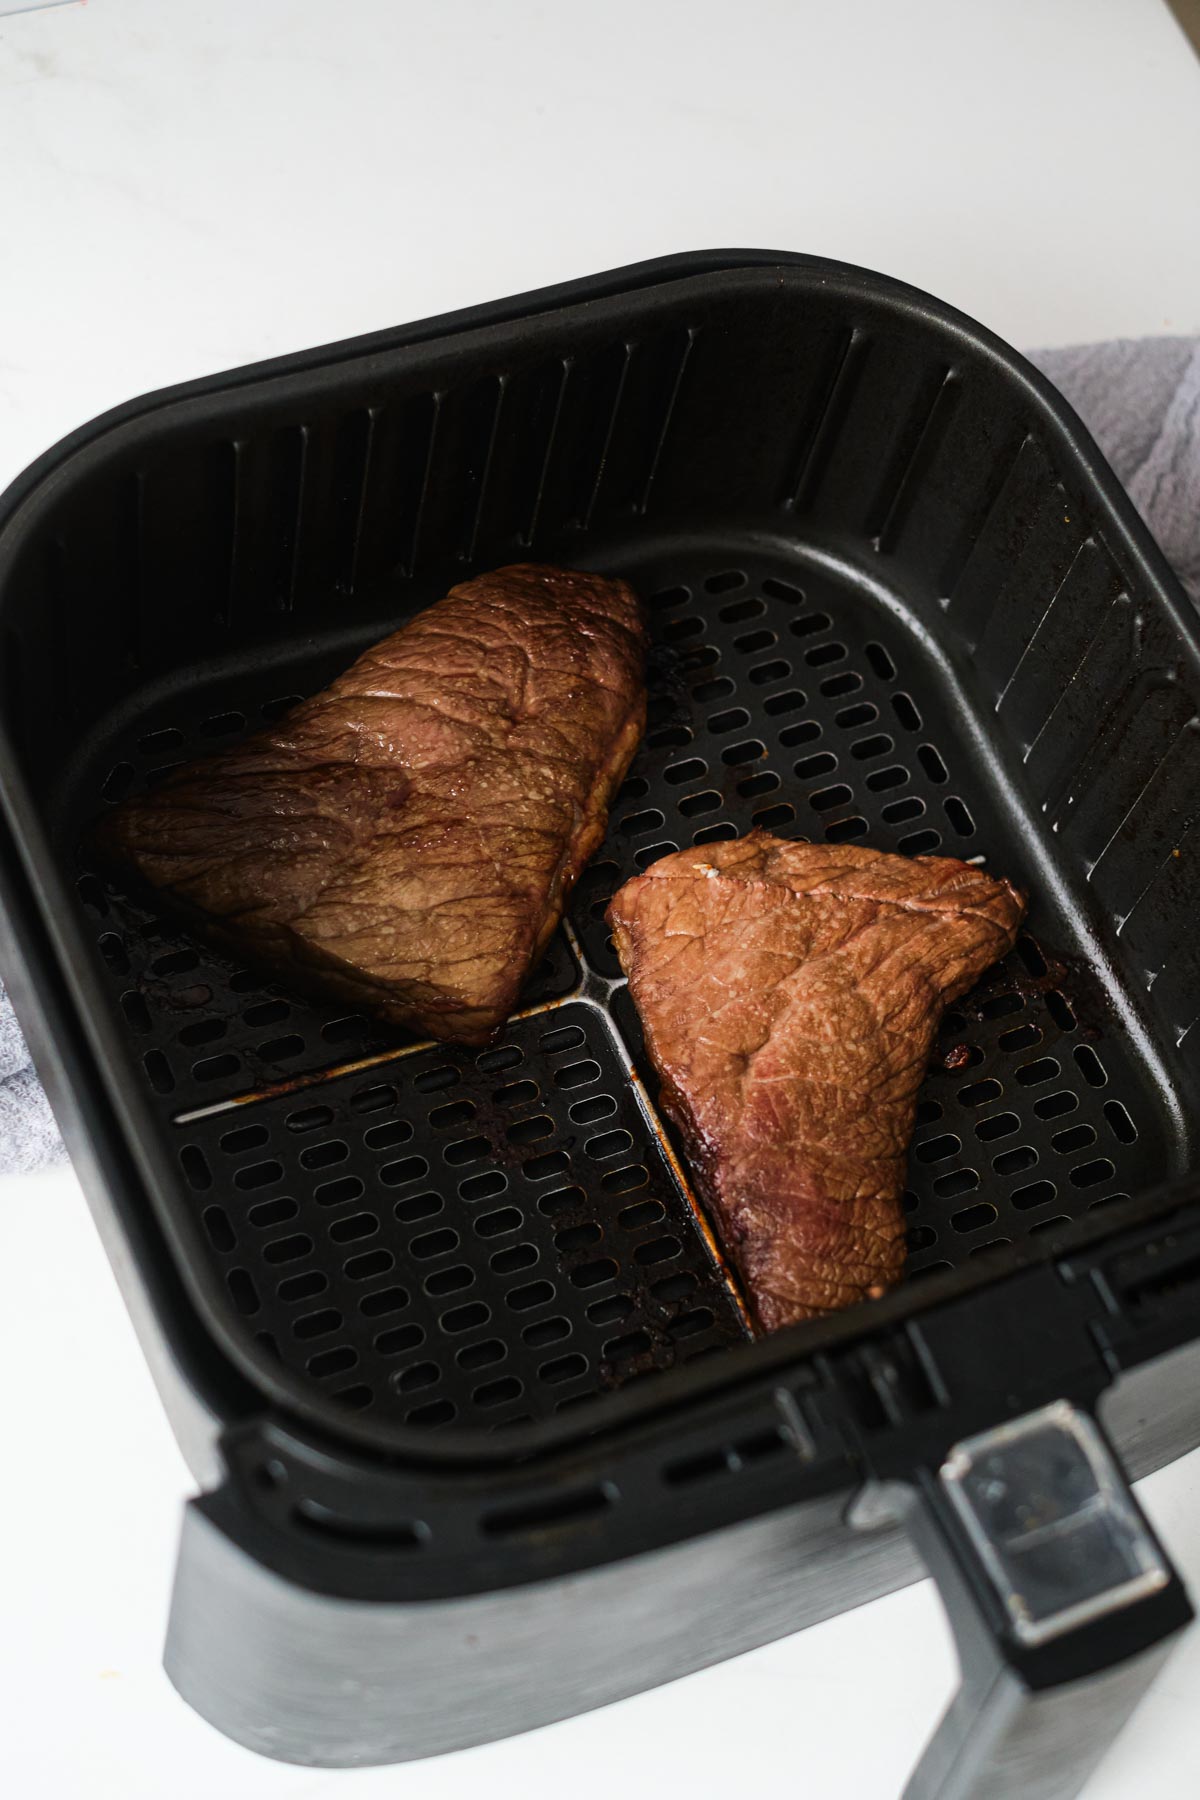 two portions of steak in the air fryer basket